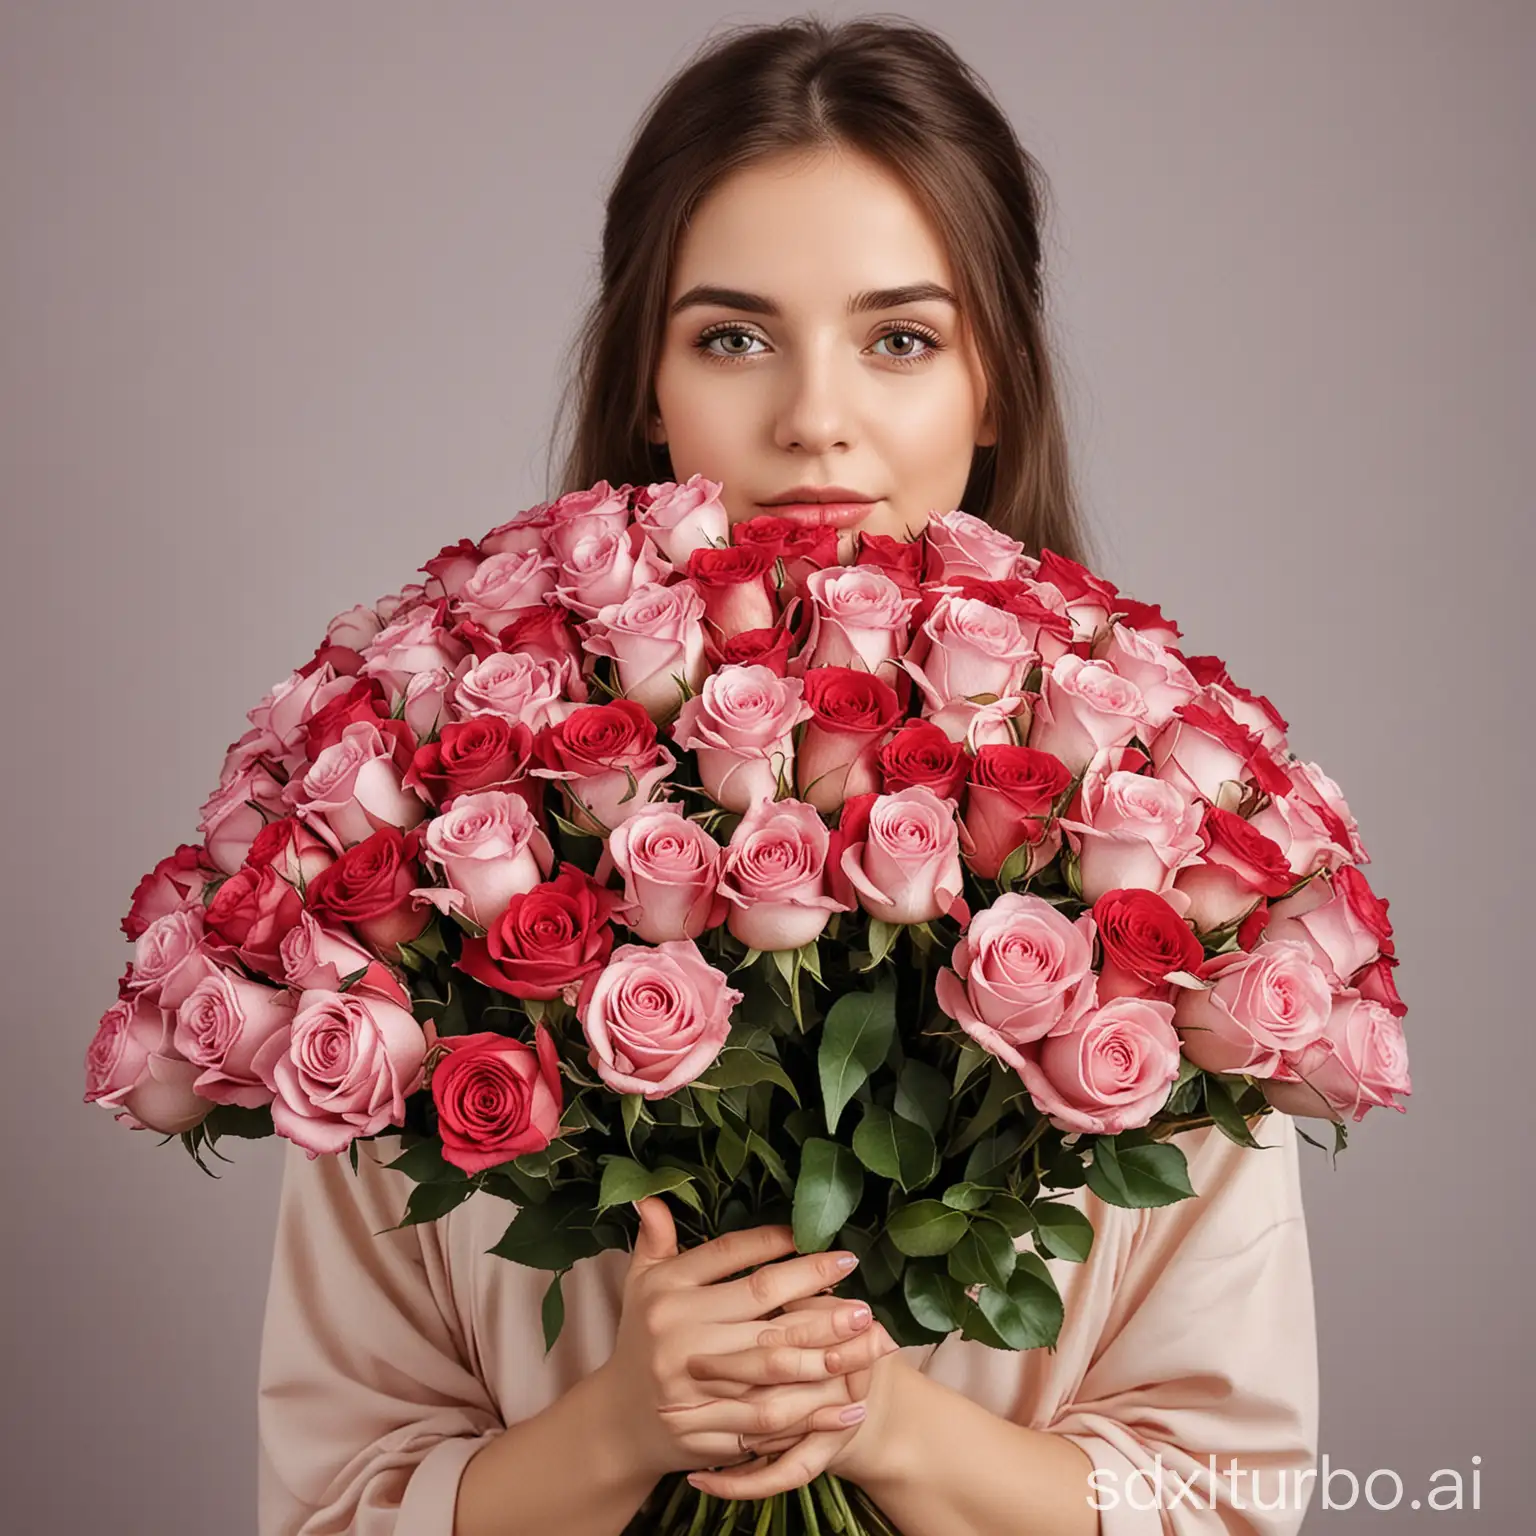 girl holds a large bouquet of roses, covering face with roses